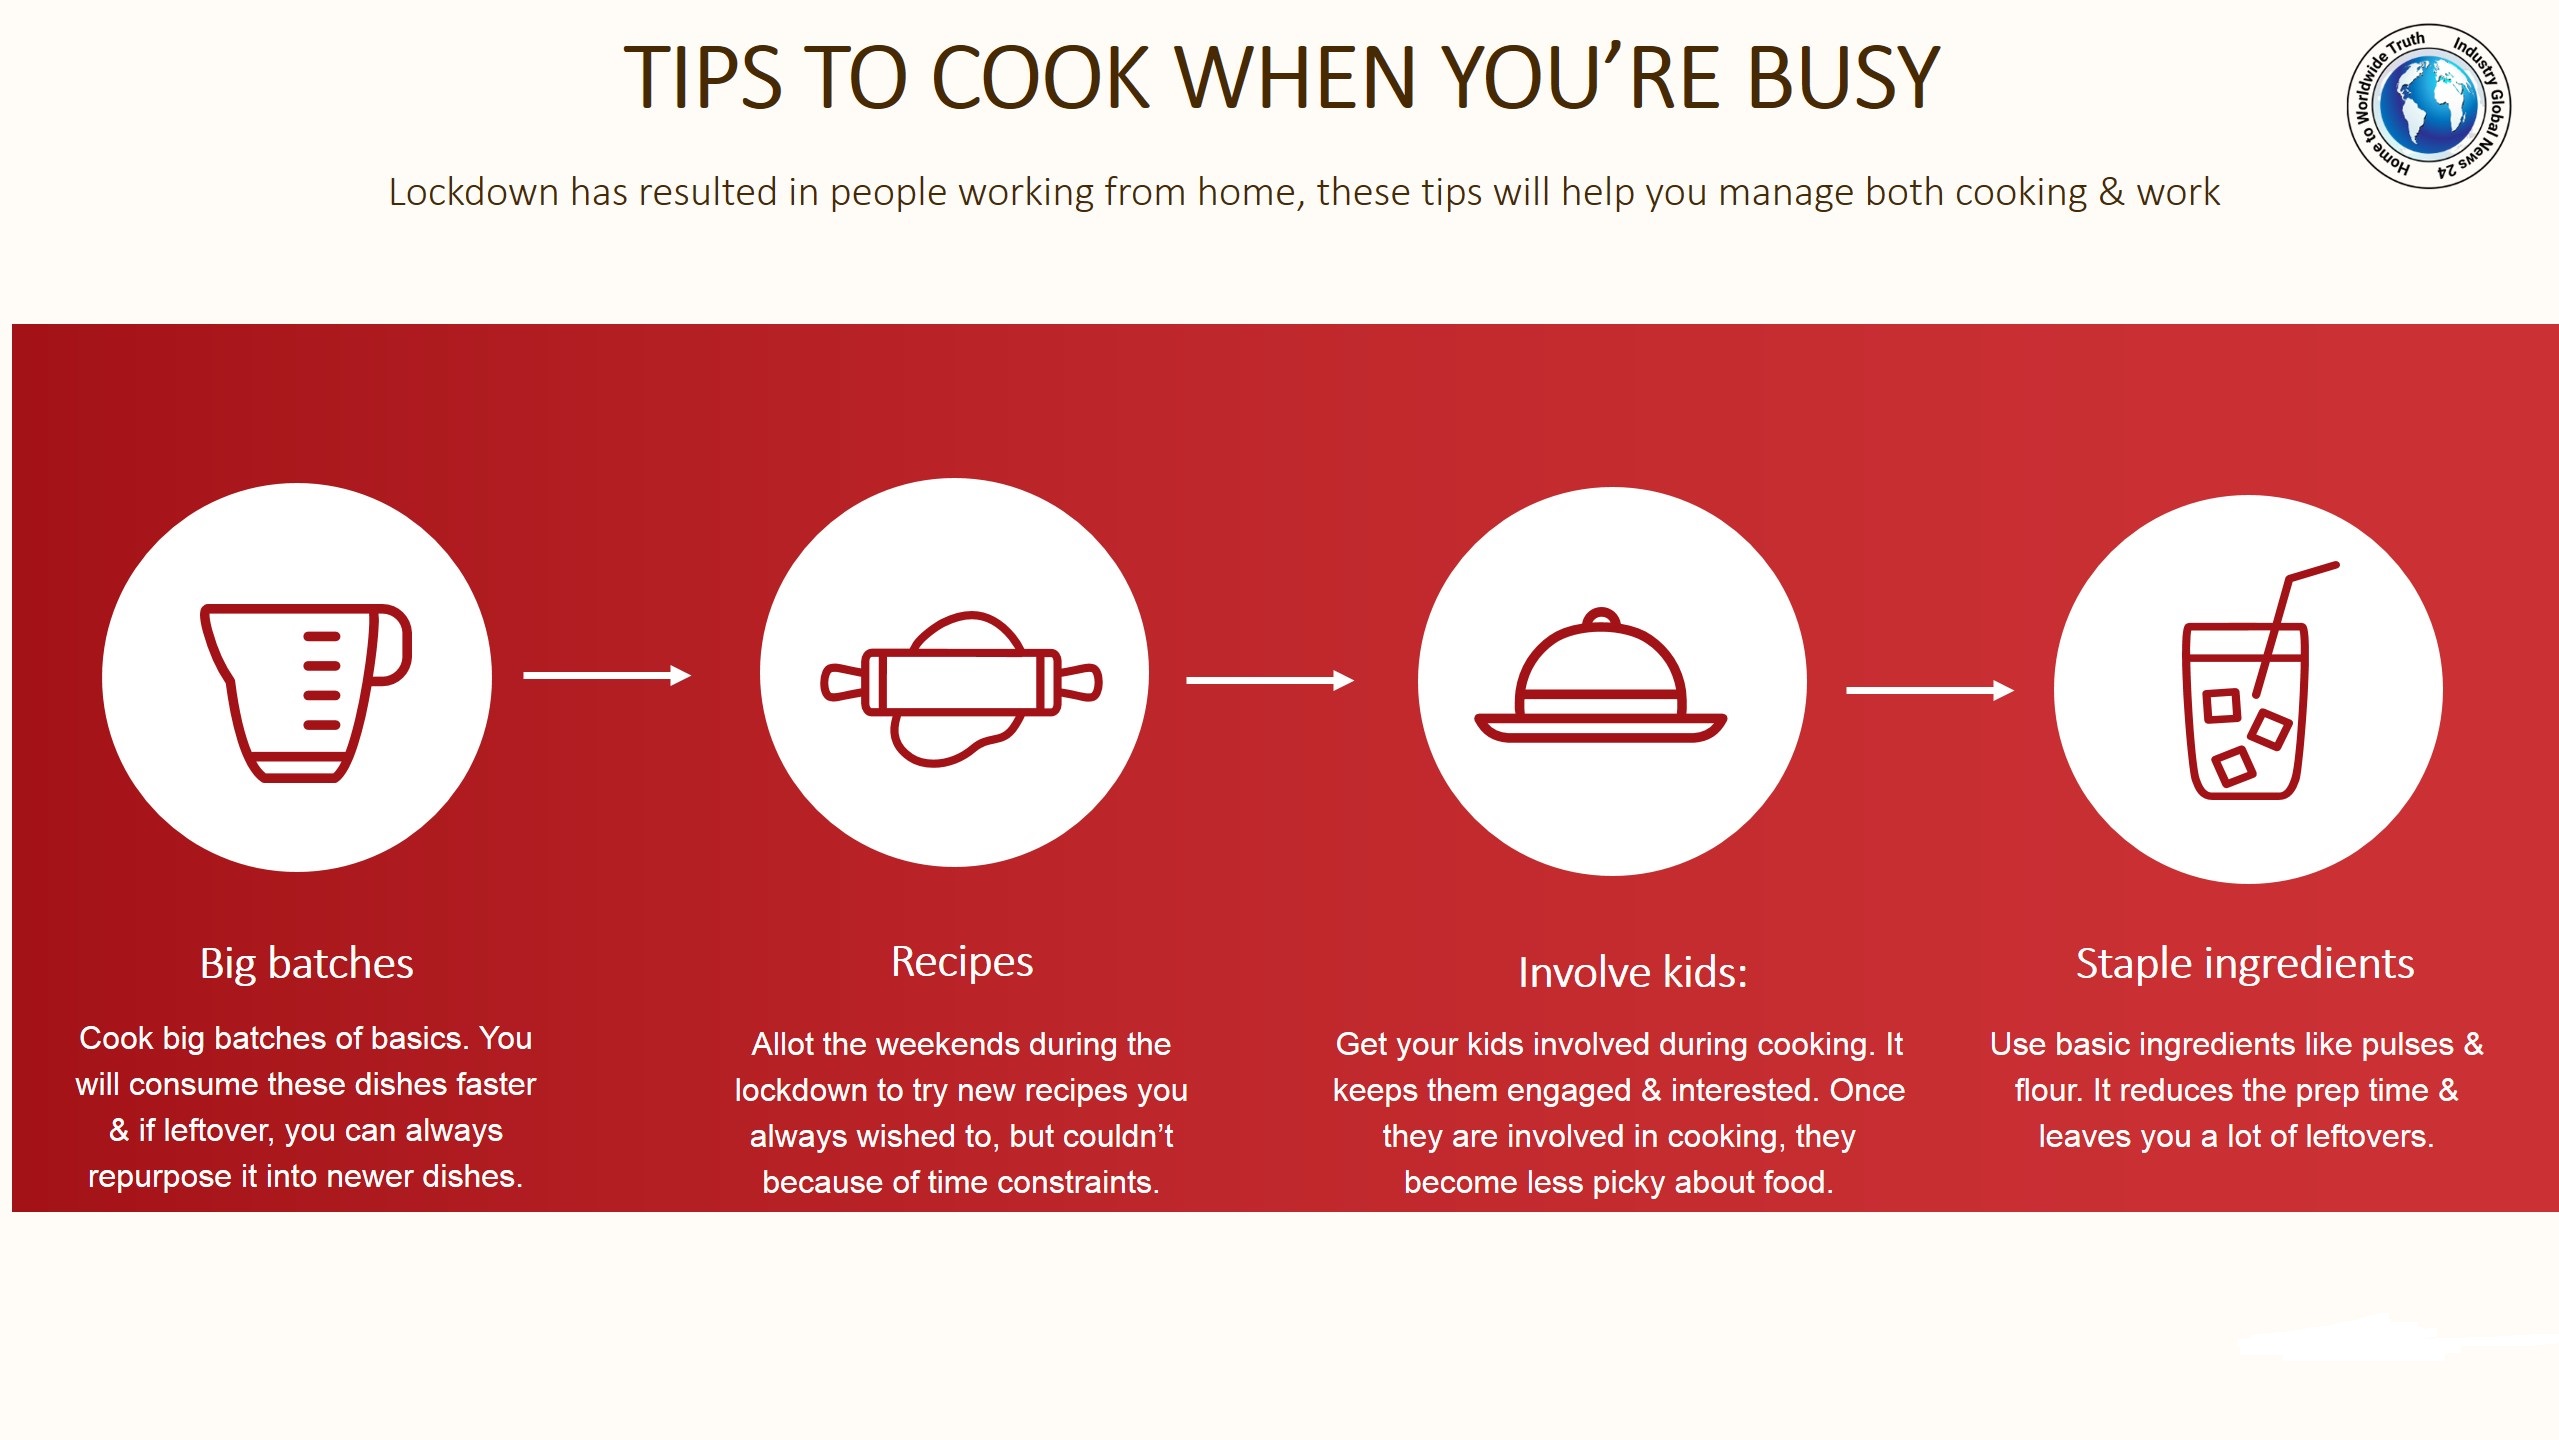 Tips to cook when you’re busy